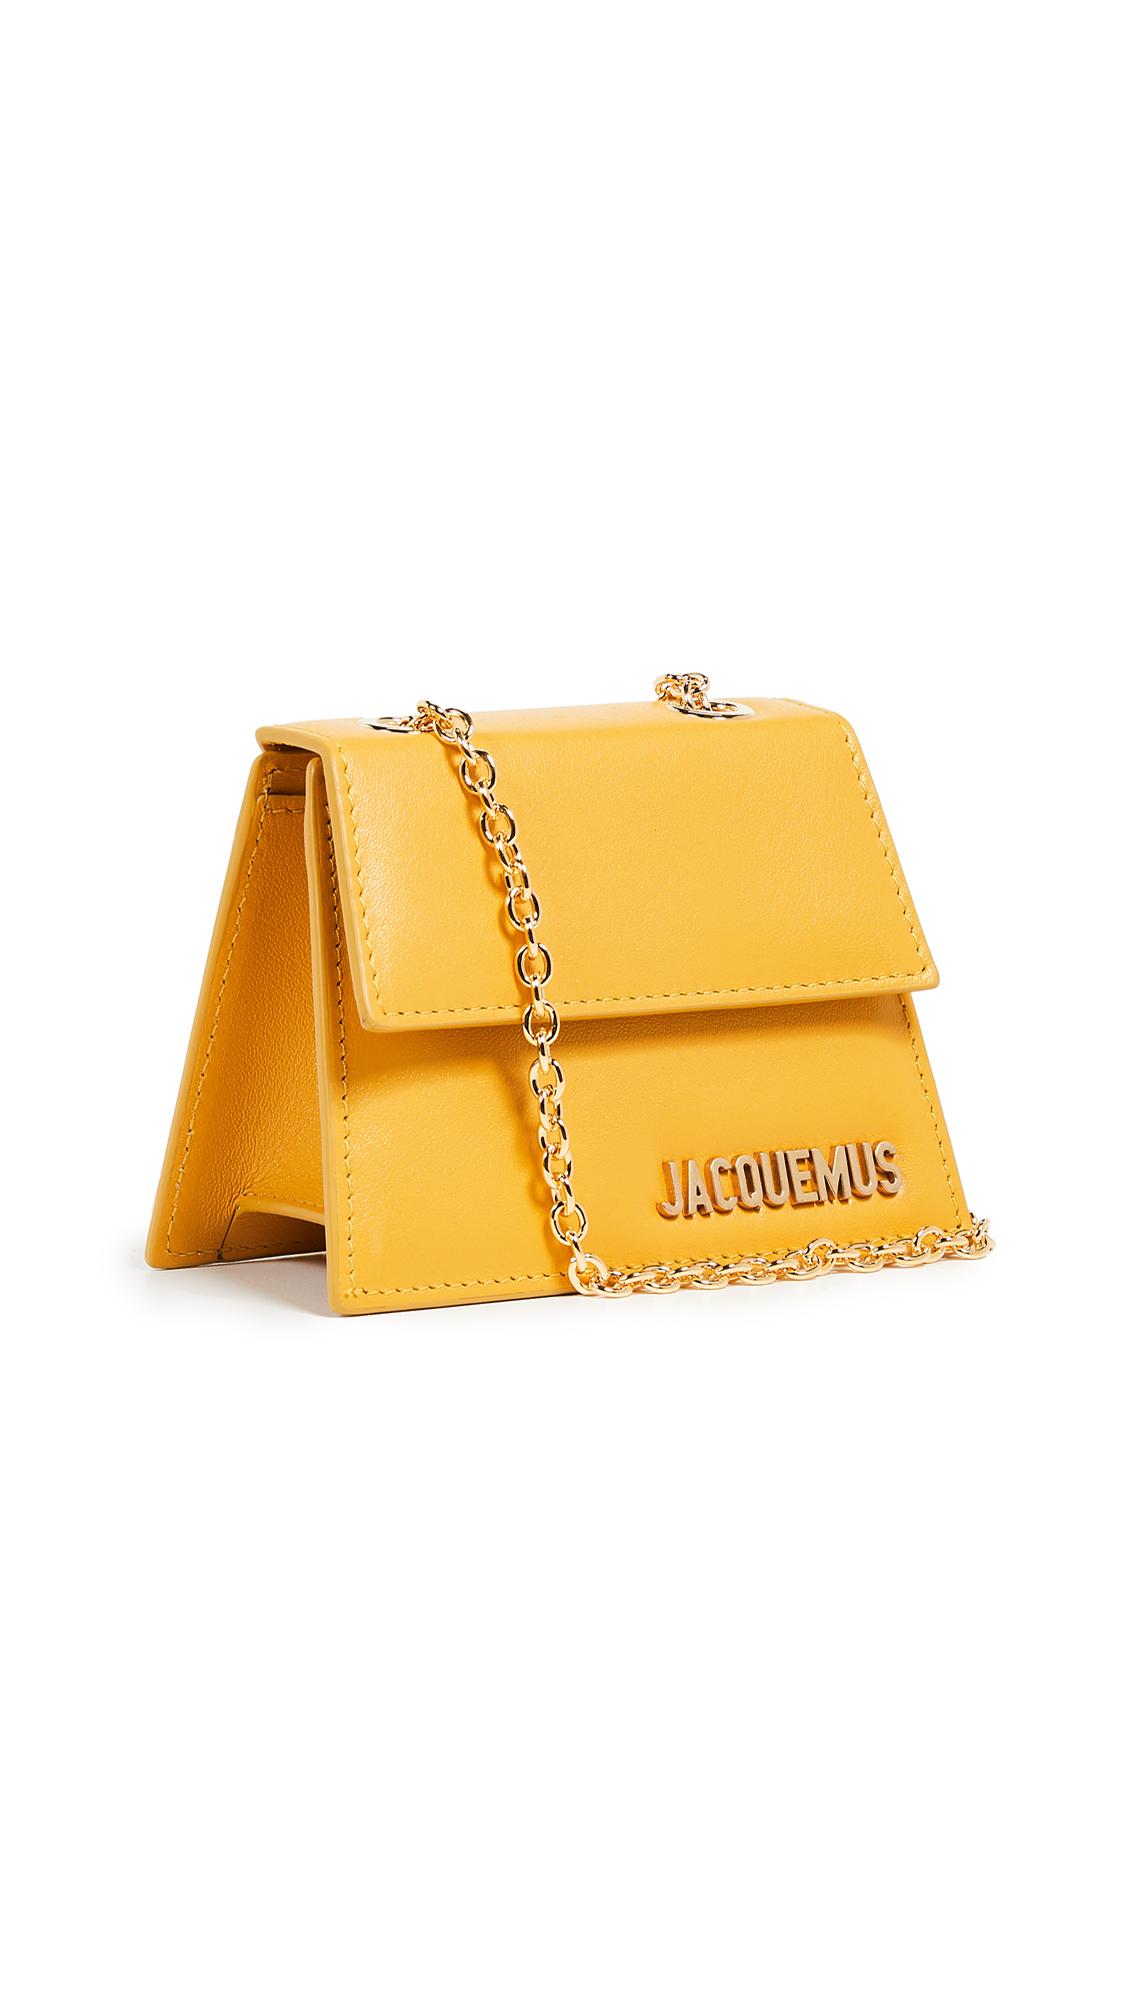 Jacquemus Le Piccolo Bag in Yellow | Lyst